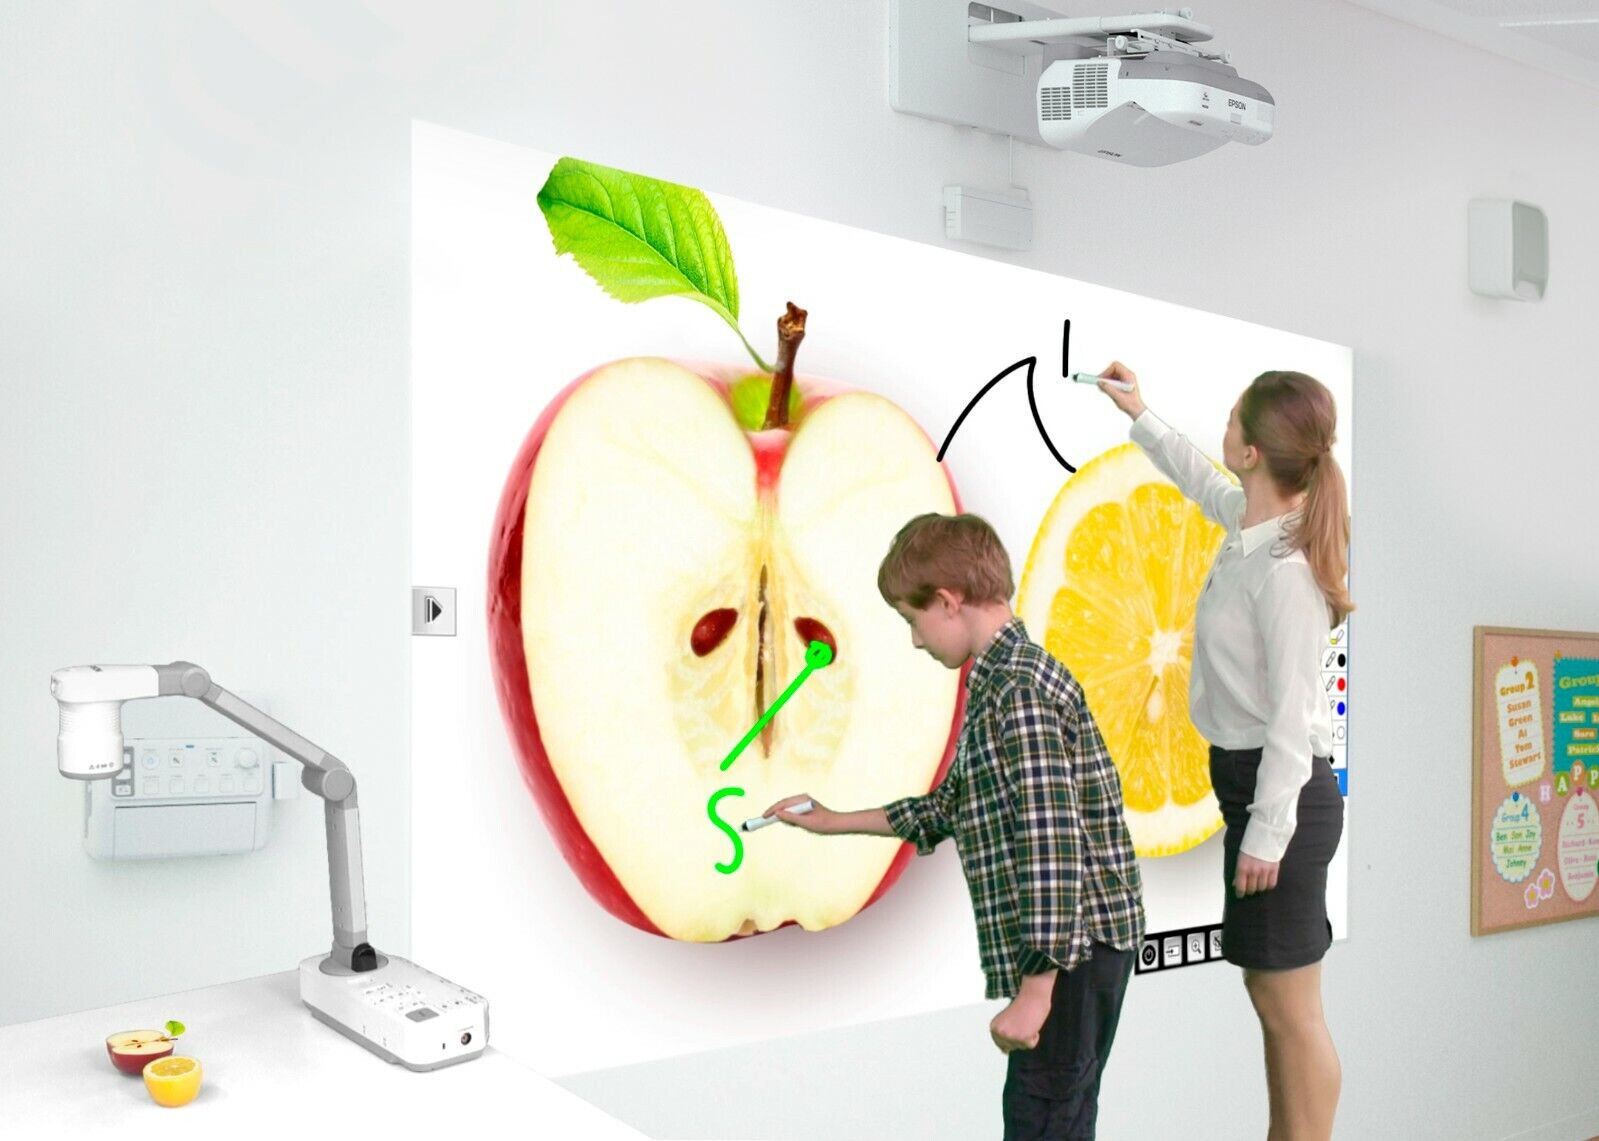 Refurbished EPSON 595Wi Interactive projector for classroom and office presentations (2 yrs guarantee)